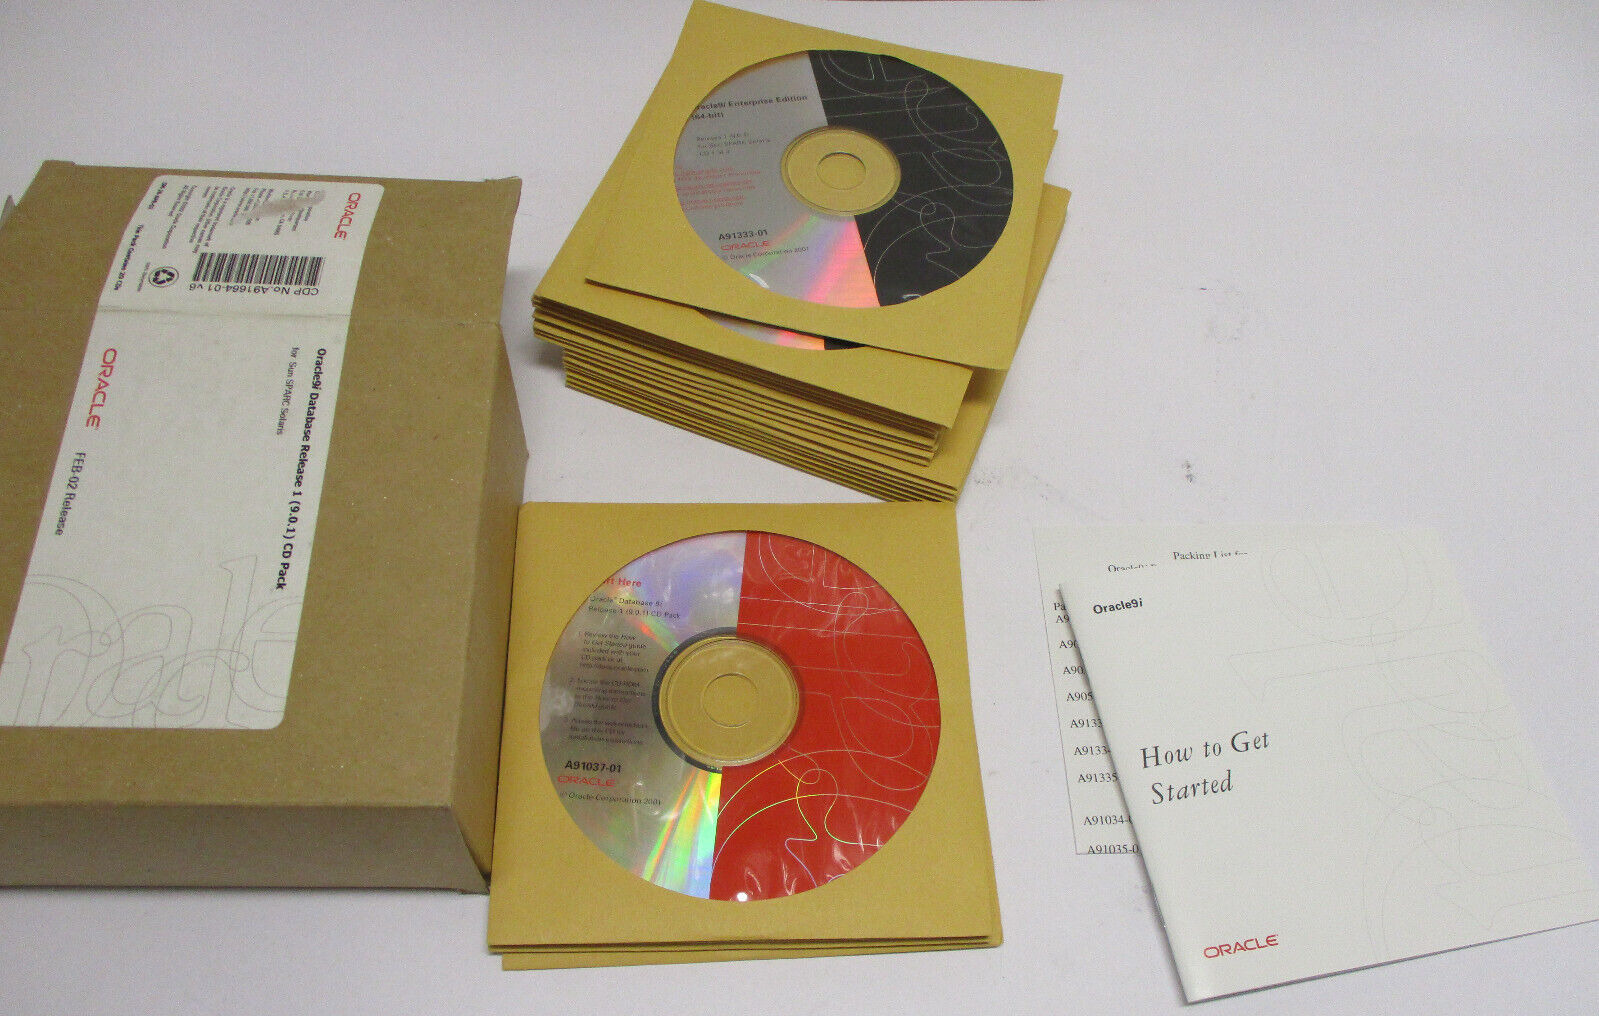 Vintage Oracle 9i Database Release 1 9.0.1 Cd Pack for Sun SPARC Solaris